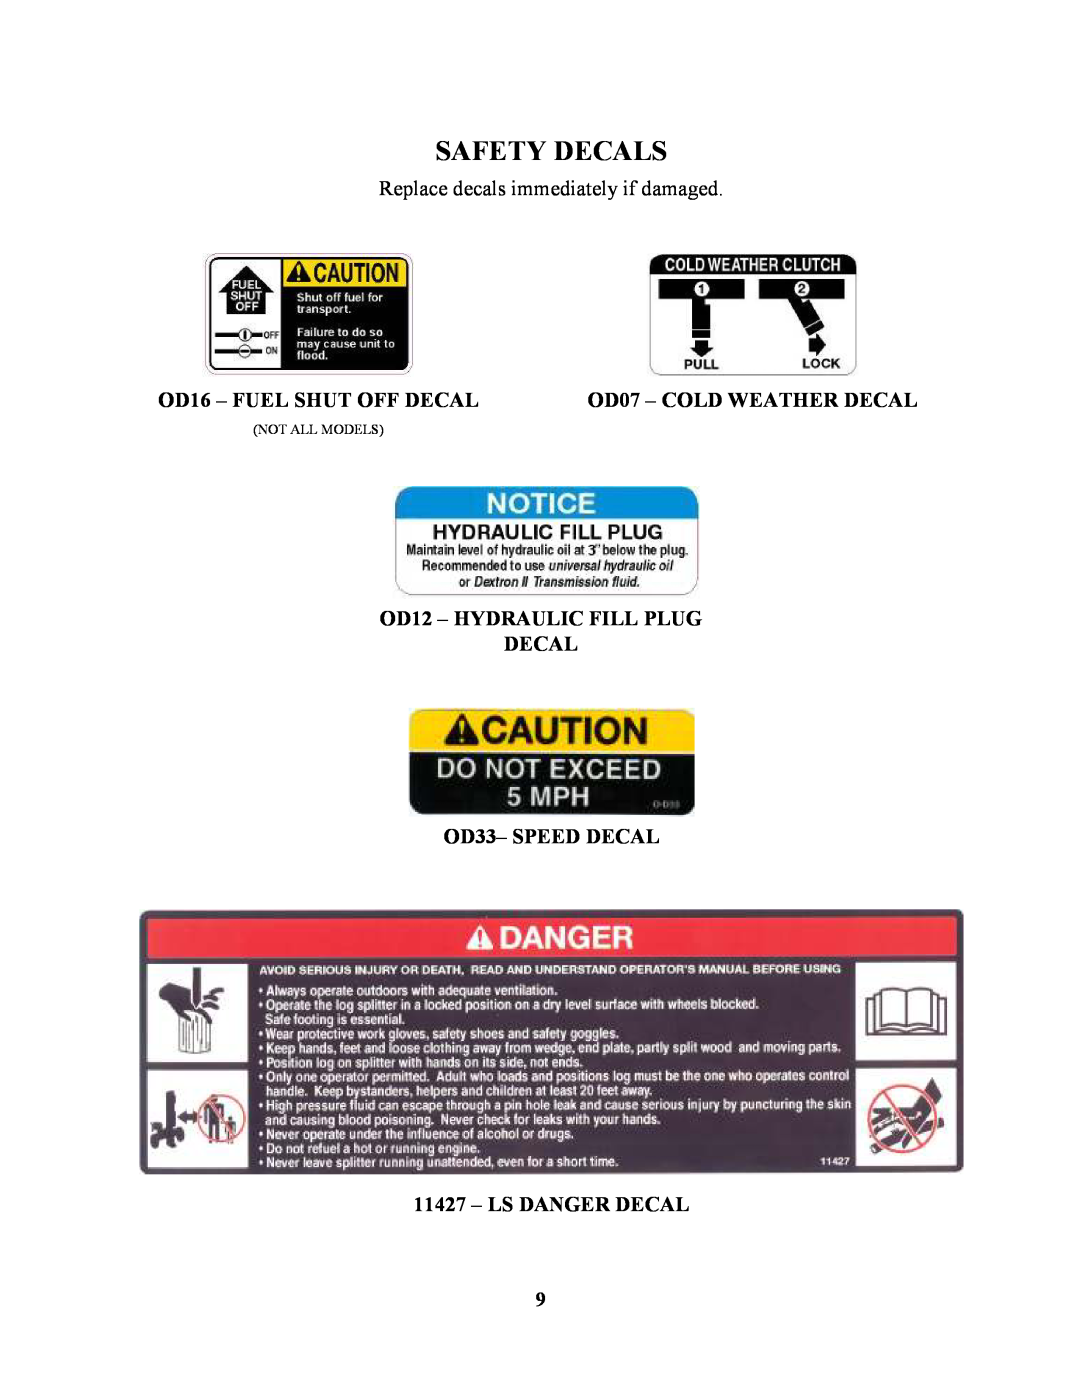 Swisher LS422X Safety Decals, Replace decals immediately if damaged, OD16 - FUEL SHUT OFF DECAL, OD07 - COLD WEATHER DECAL 